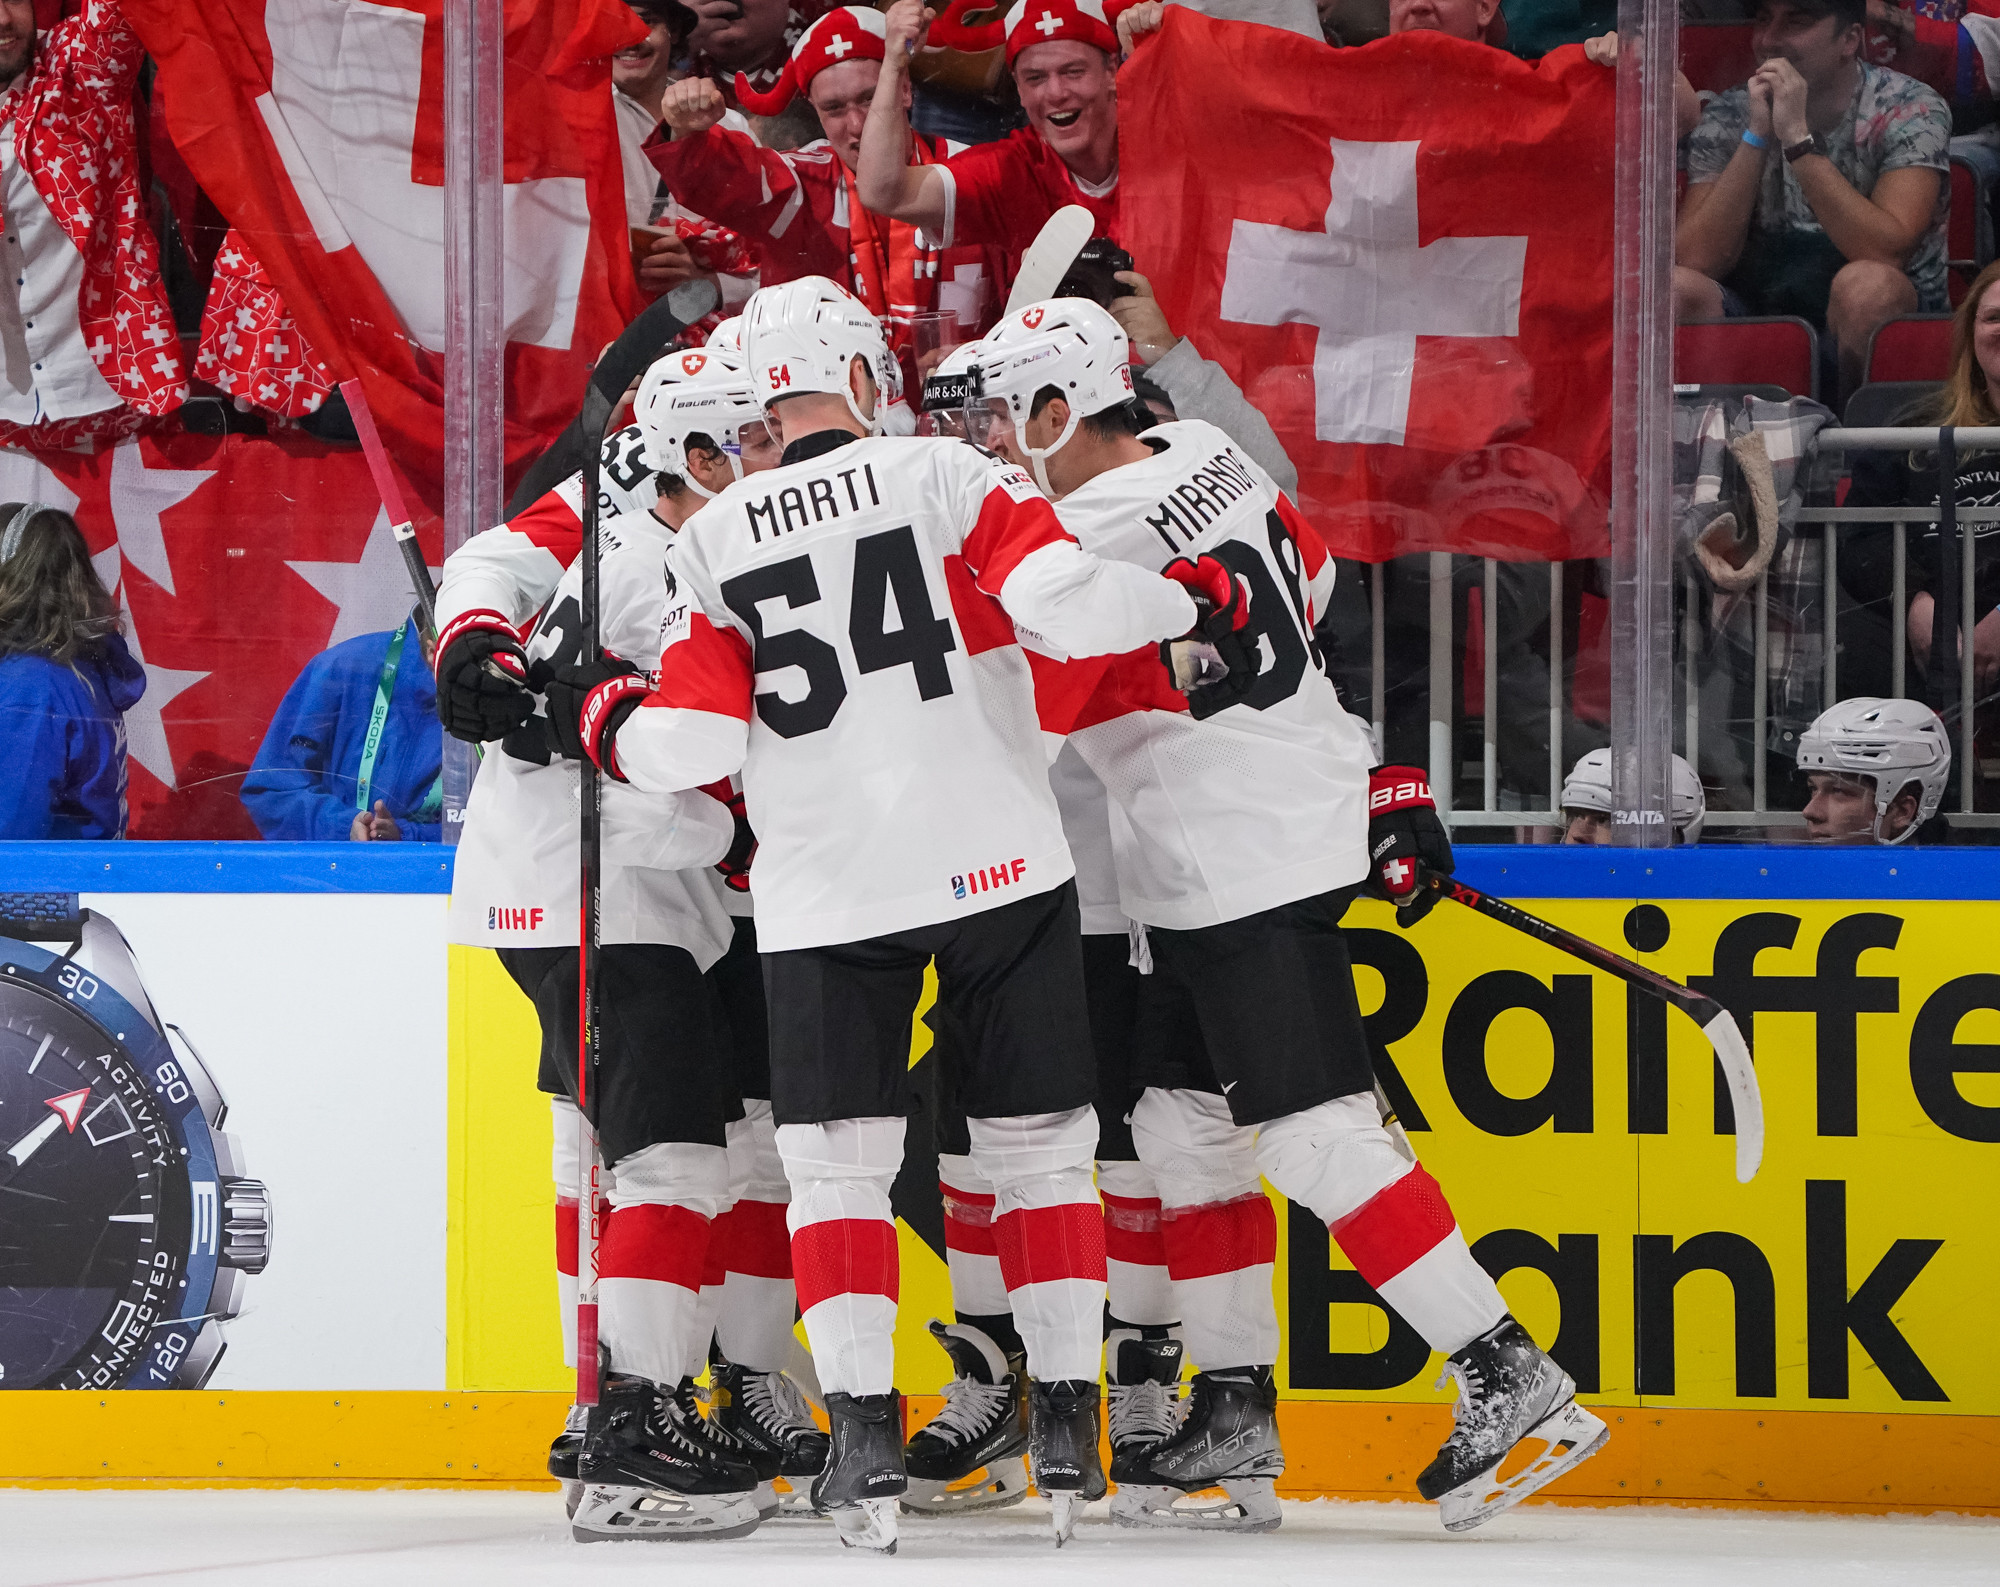 Switzerland riding high at Ice Hockey World Championship after key win over Canada